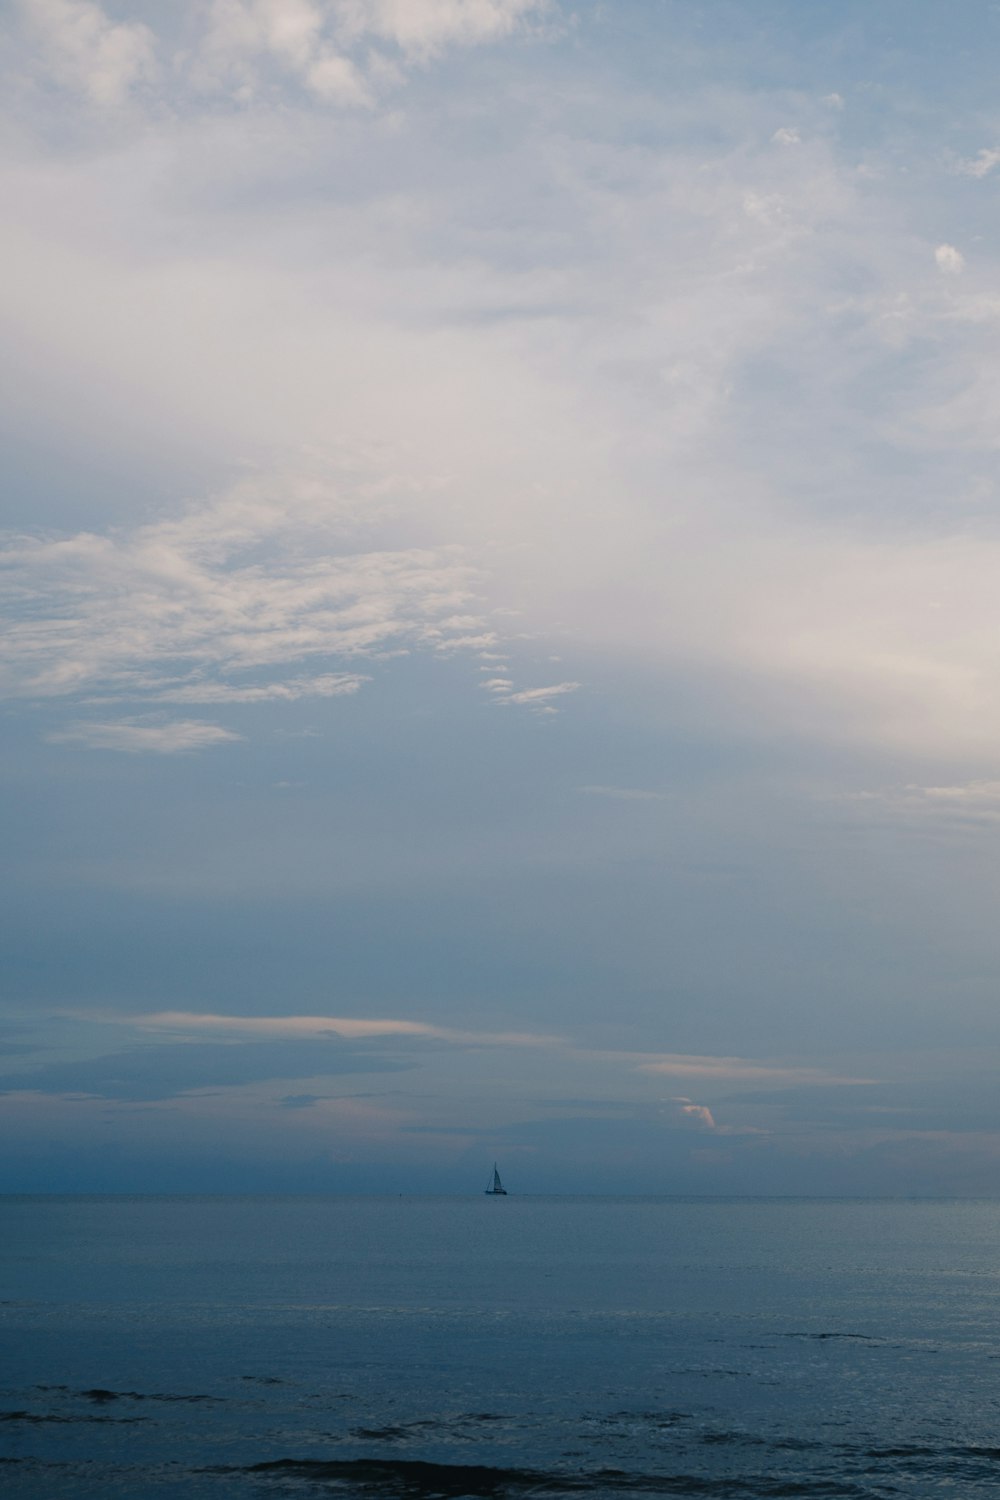 a sailboat is out on the ocean under a cloudy sky